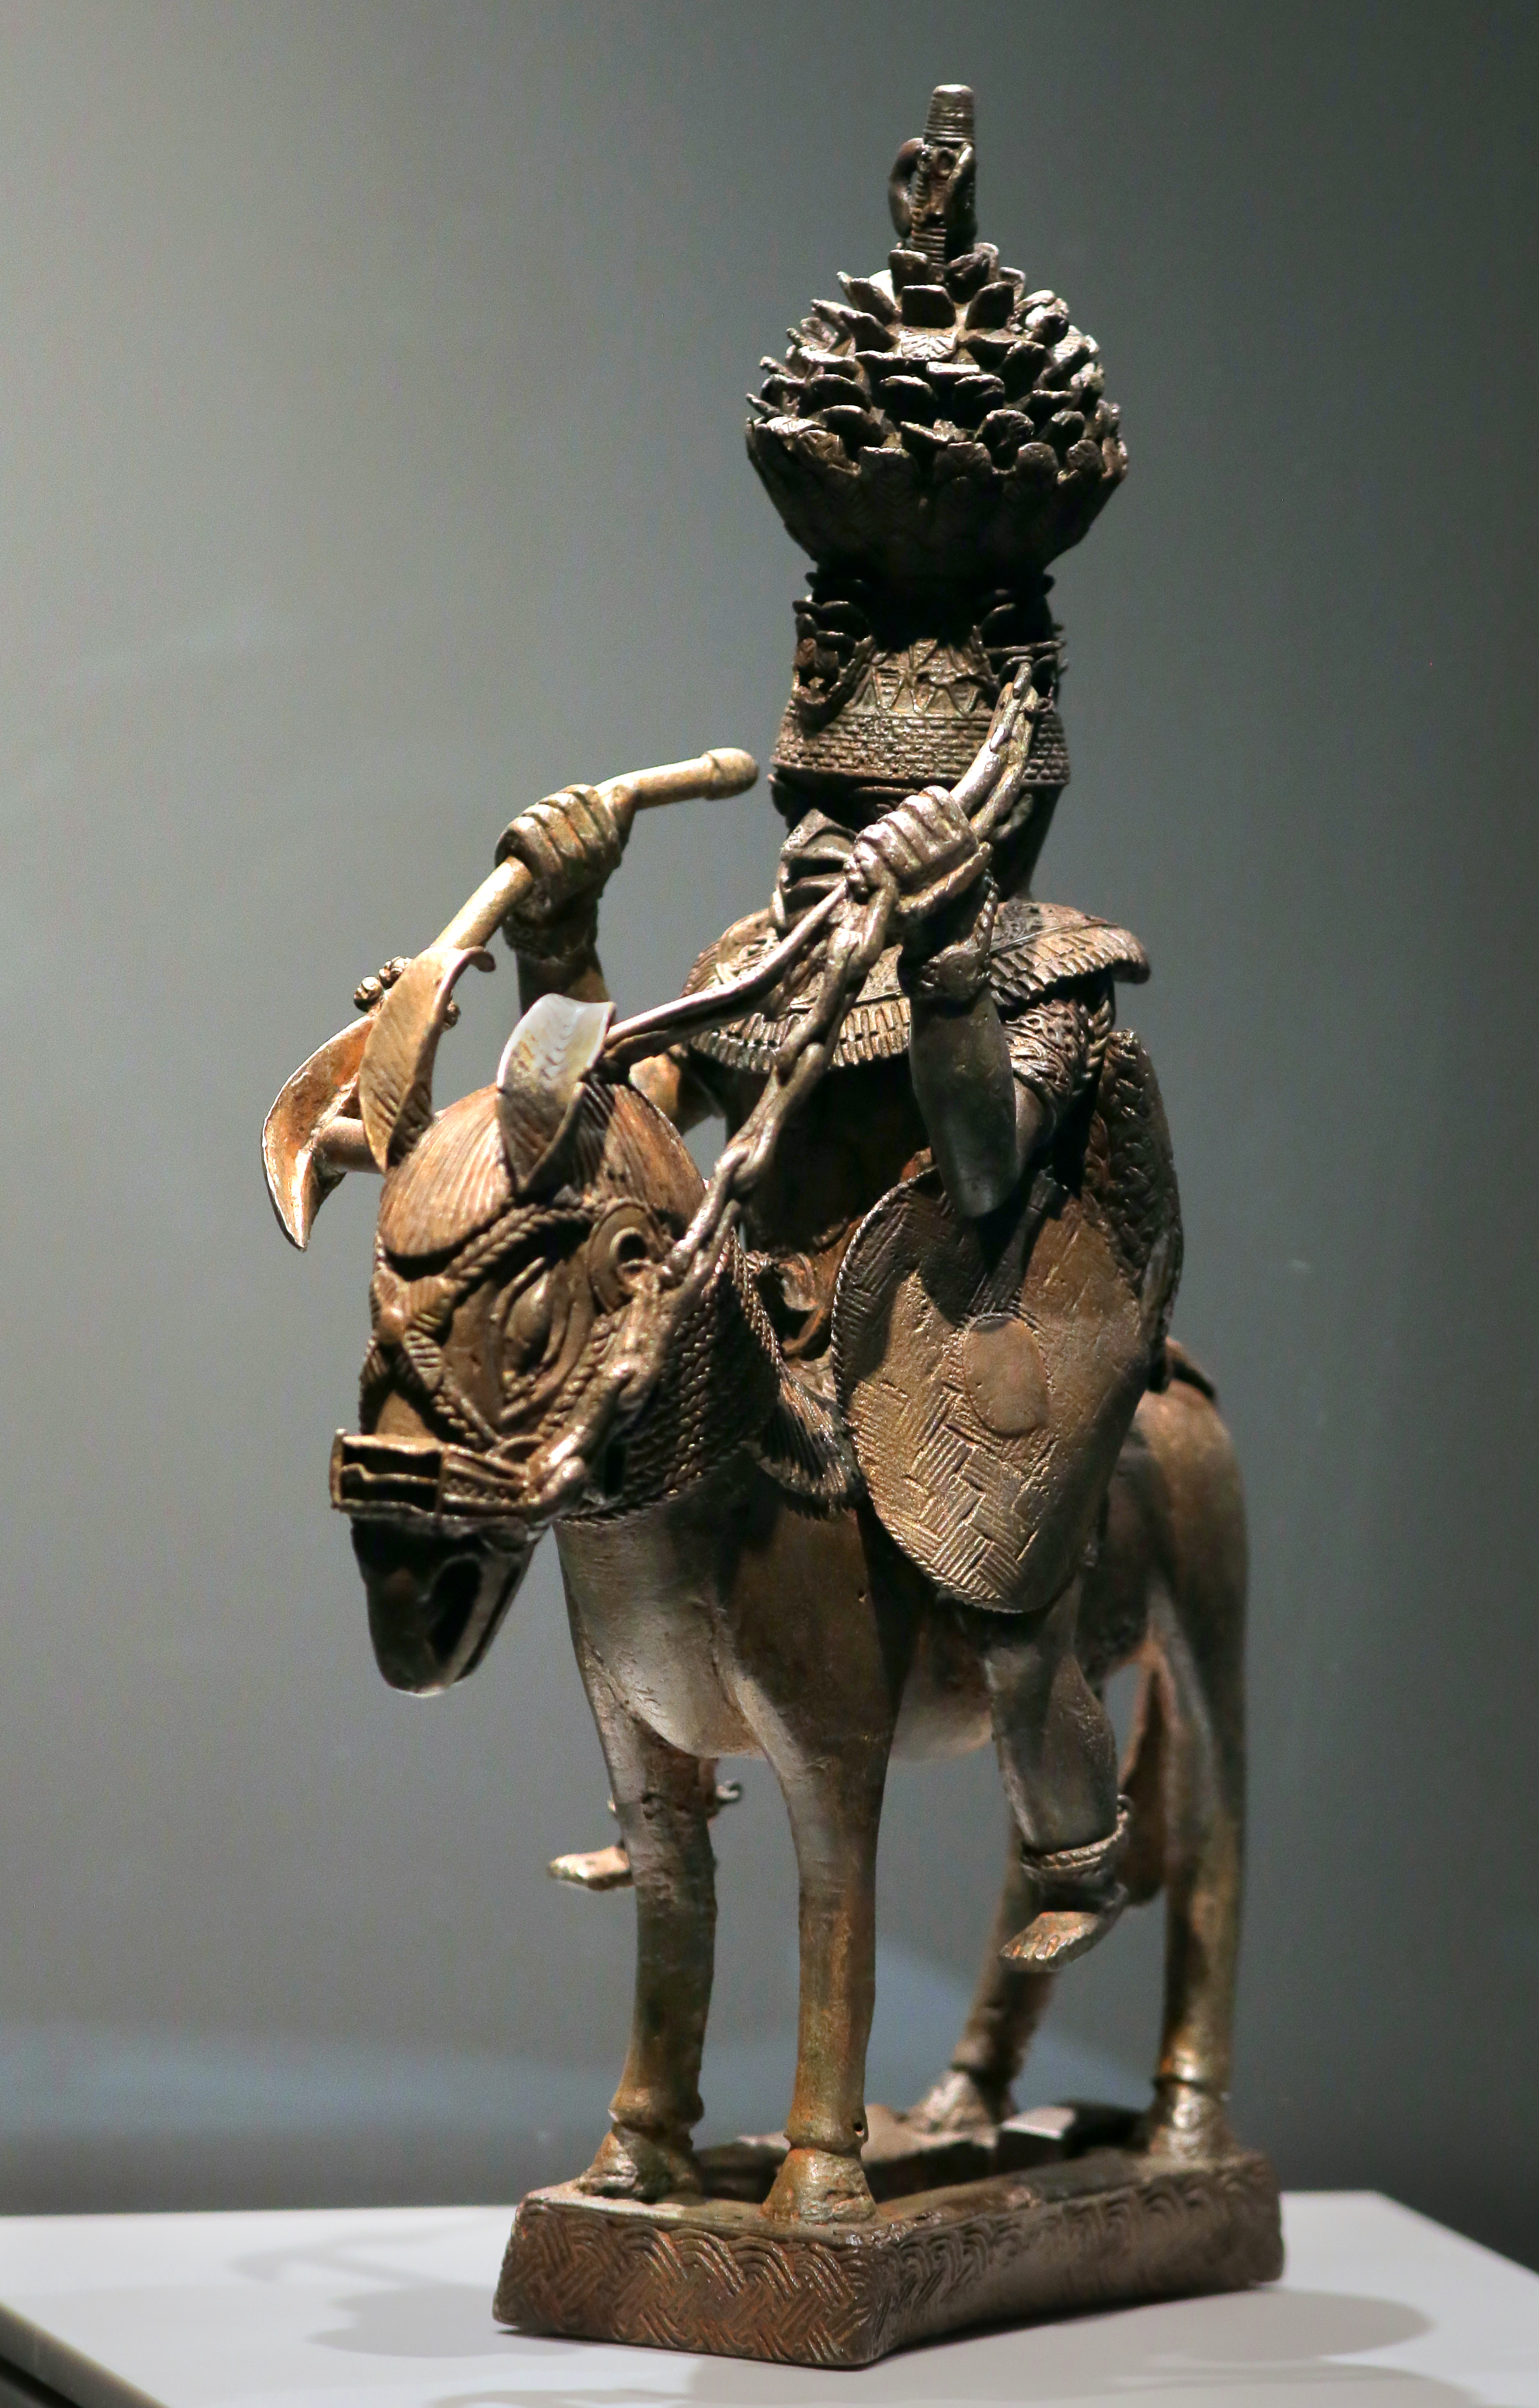 Mounted ruler (so-called Horseman) from the 16th century. The work is one of thousands taken by British forces during the 1897 attack. It is now on display at the MFA as part of a promised gift from Robert Owen Lehman.  